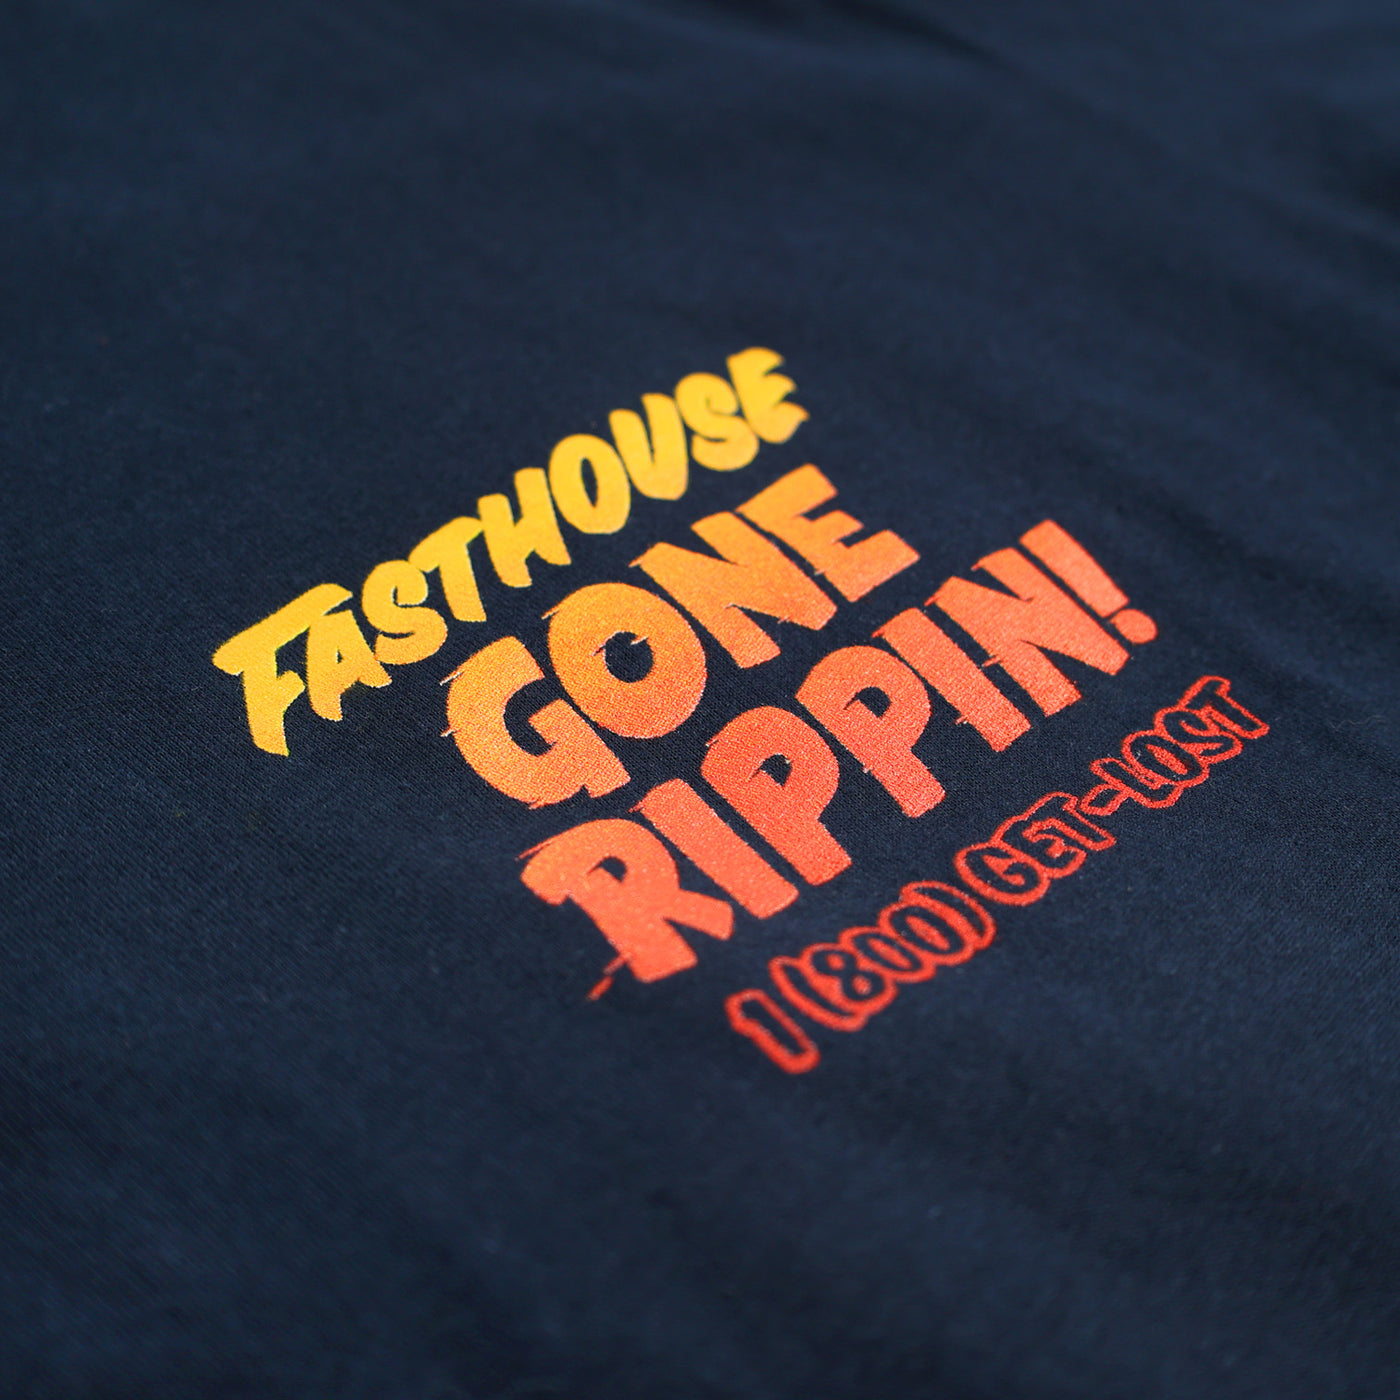 Fasthouse Resort Gone Rippin' Tee